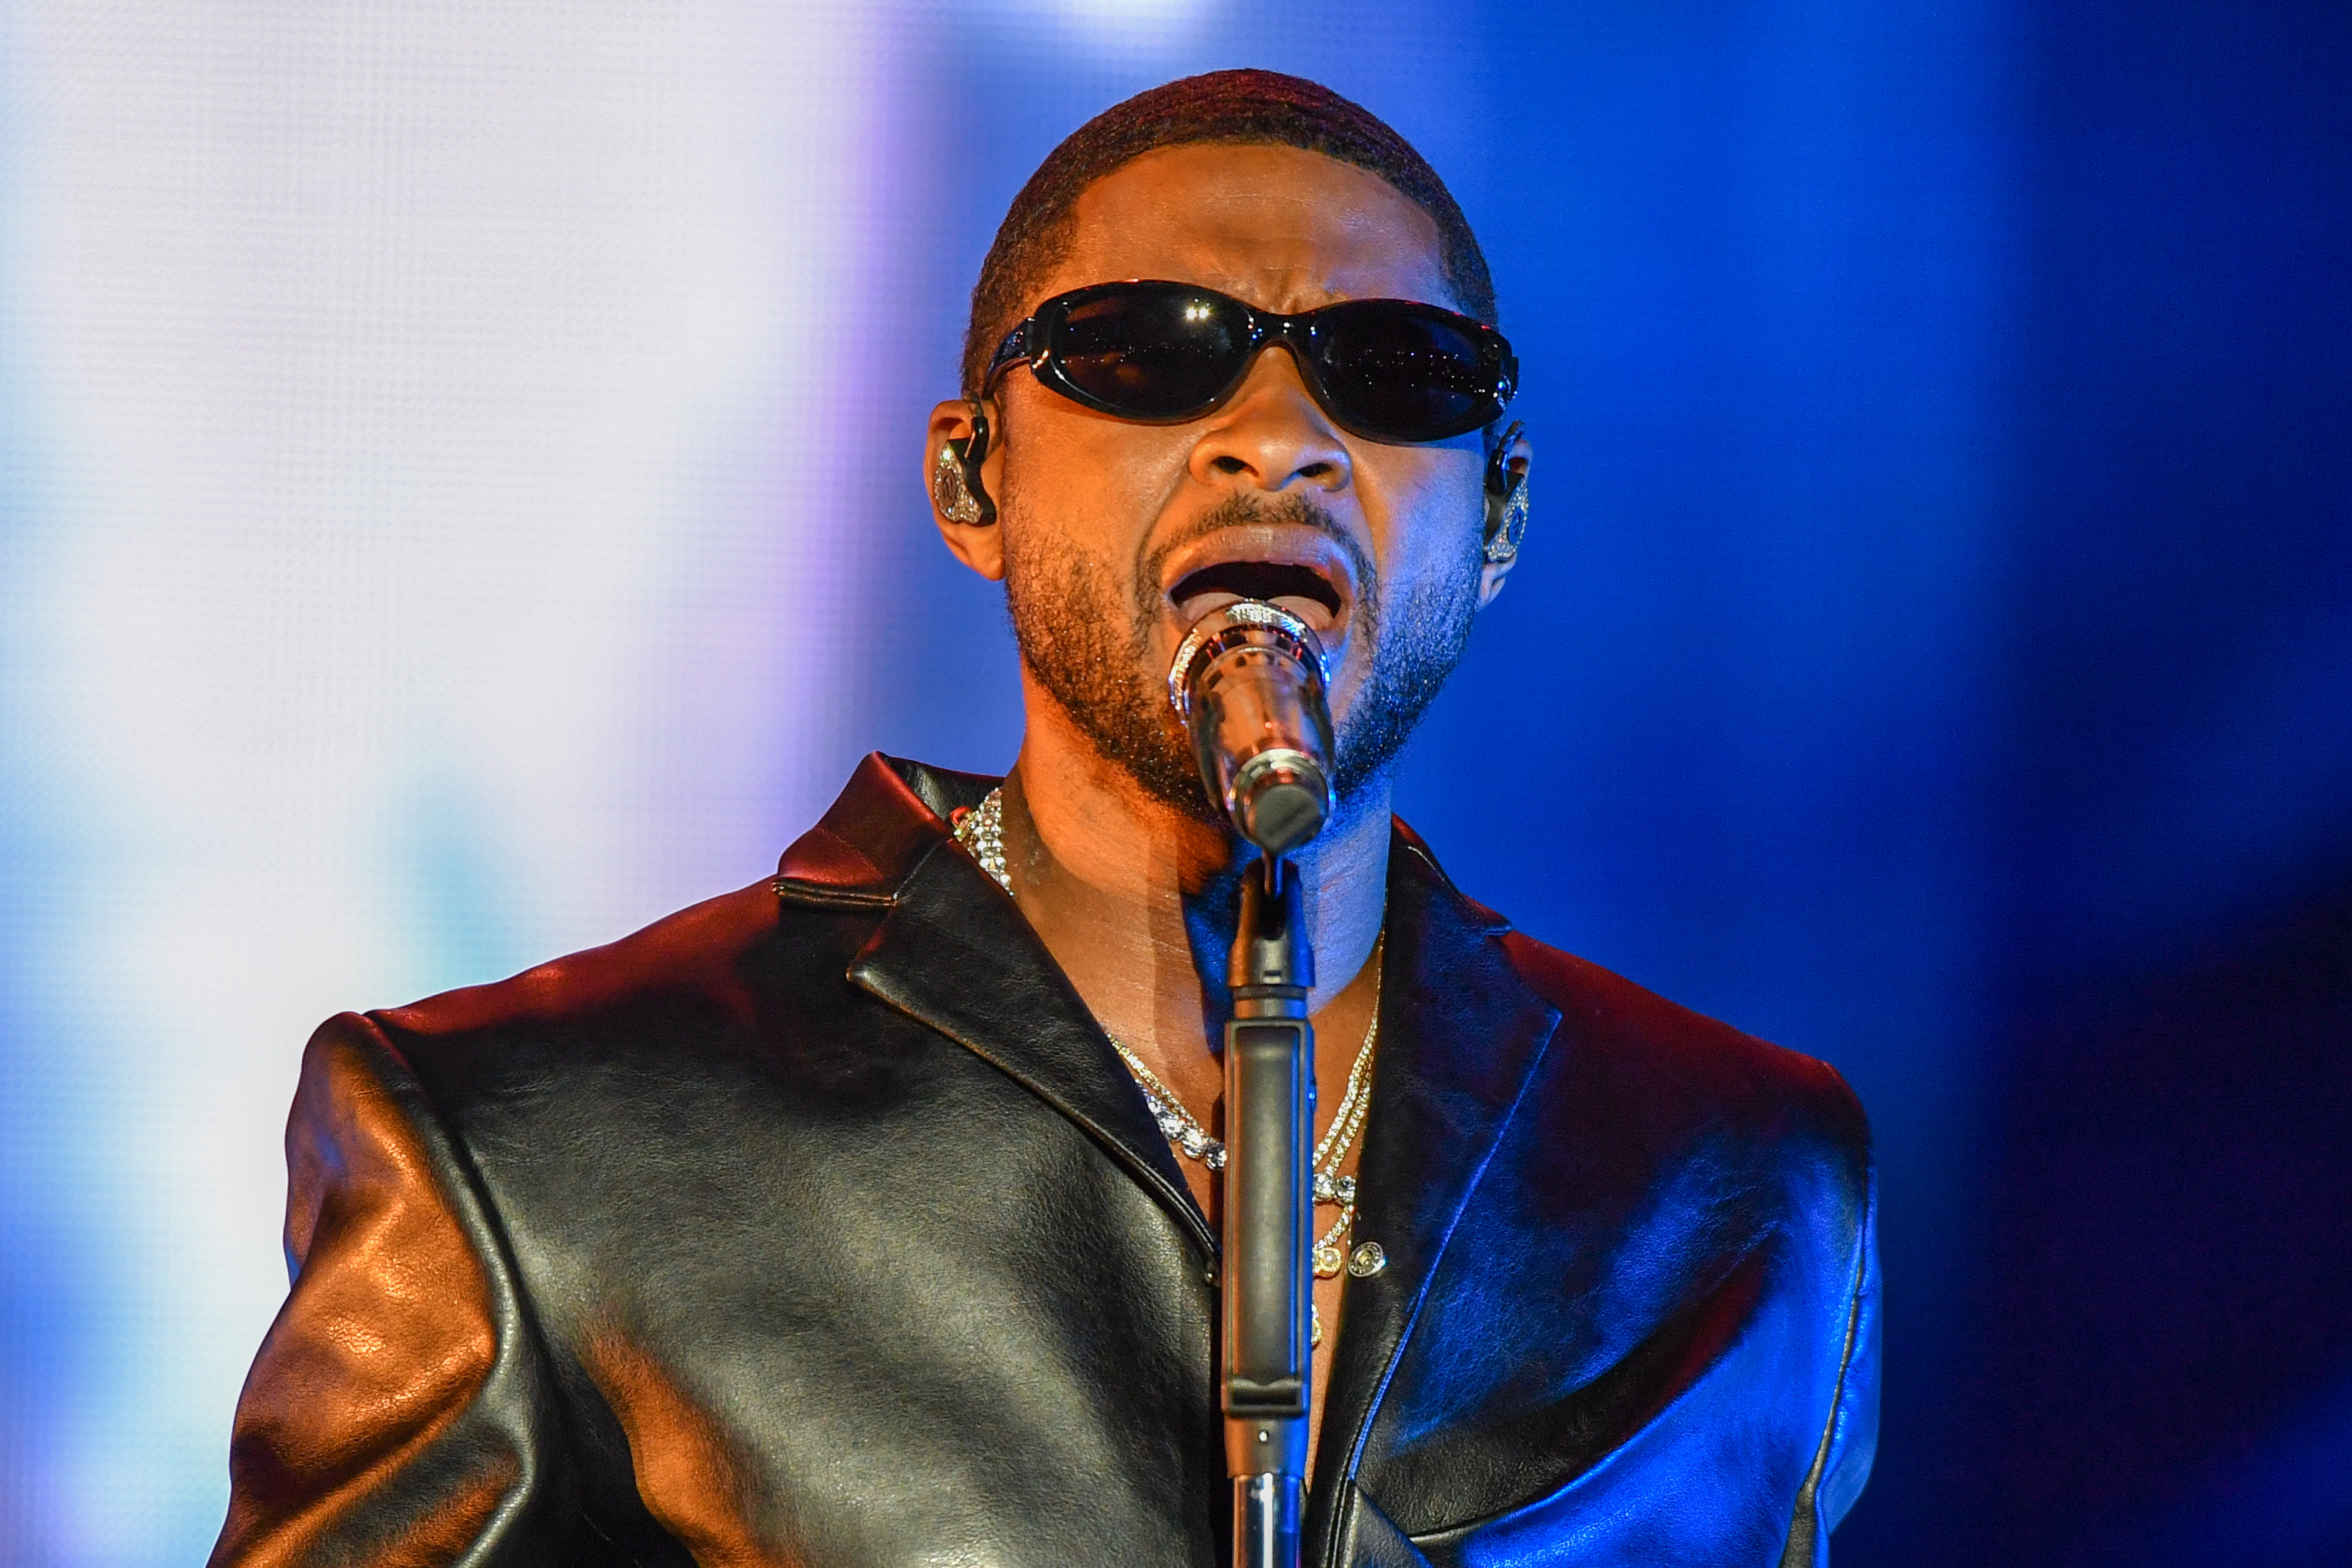 Usher Performs At Lovers & Friends After Chris Brown Fight